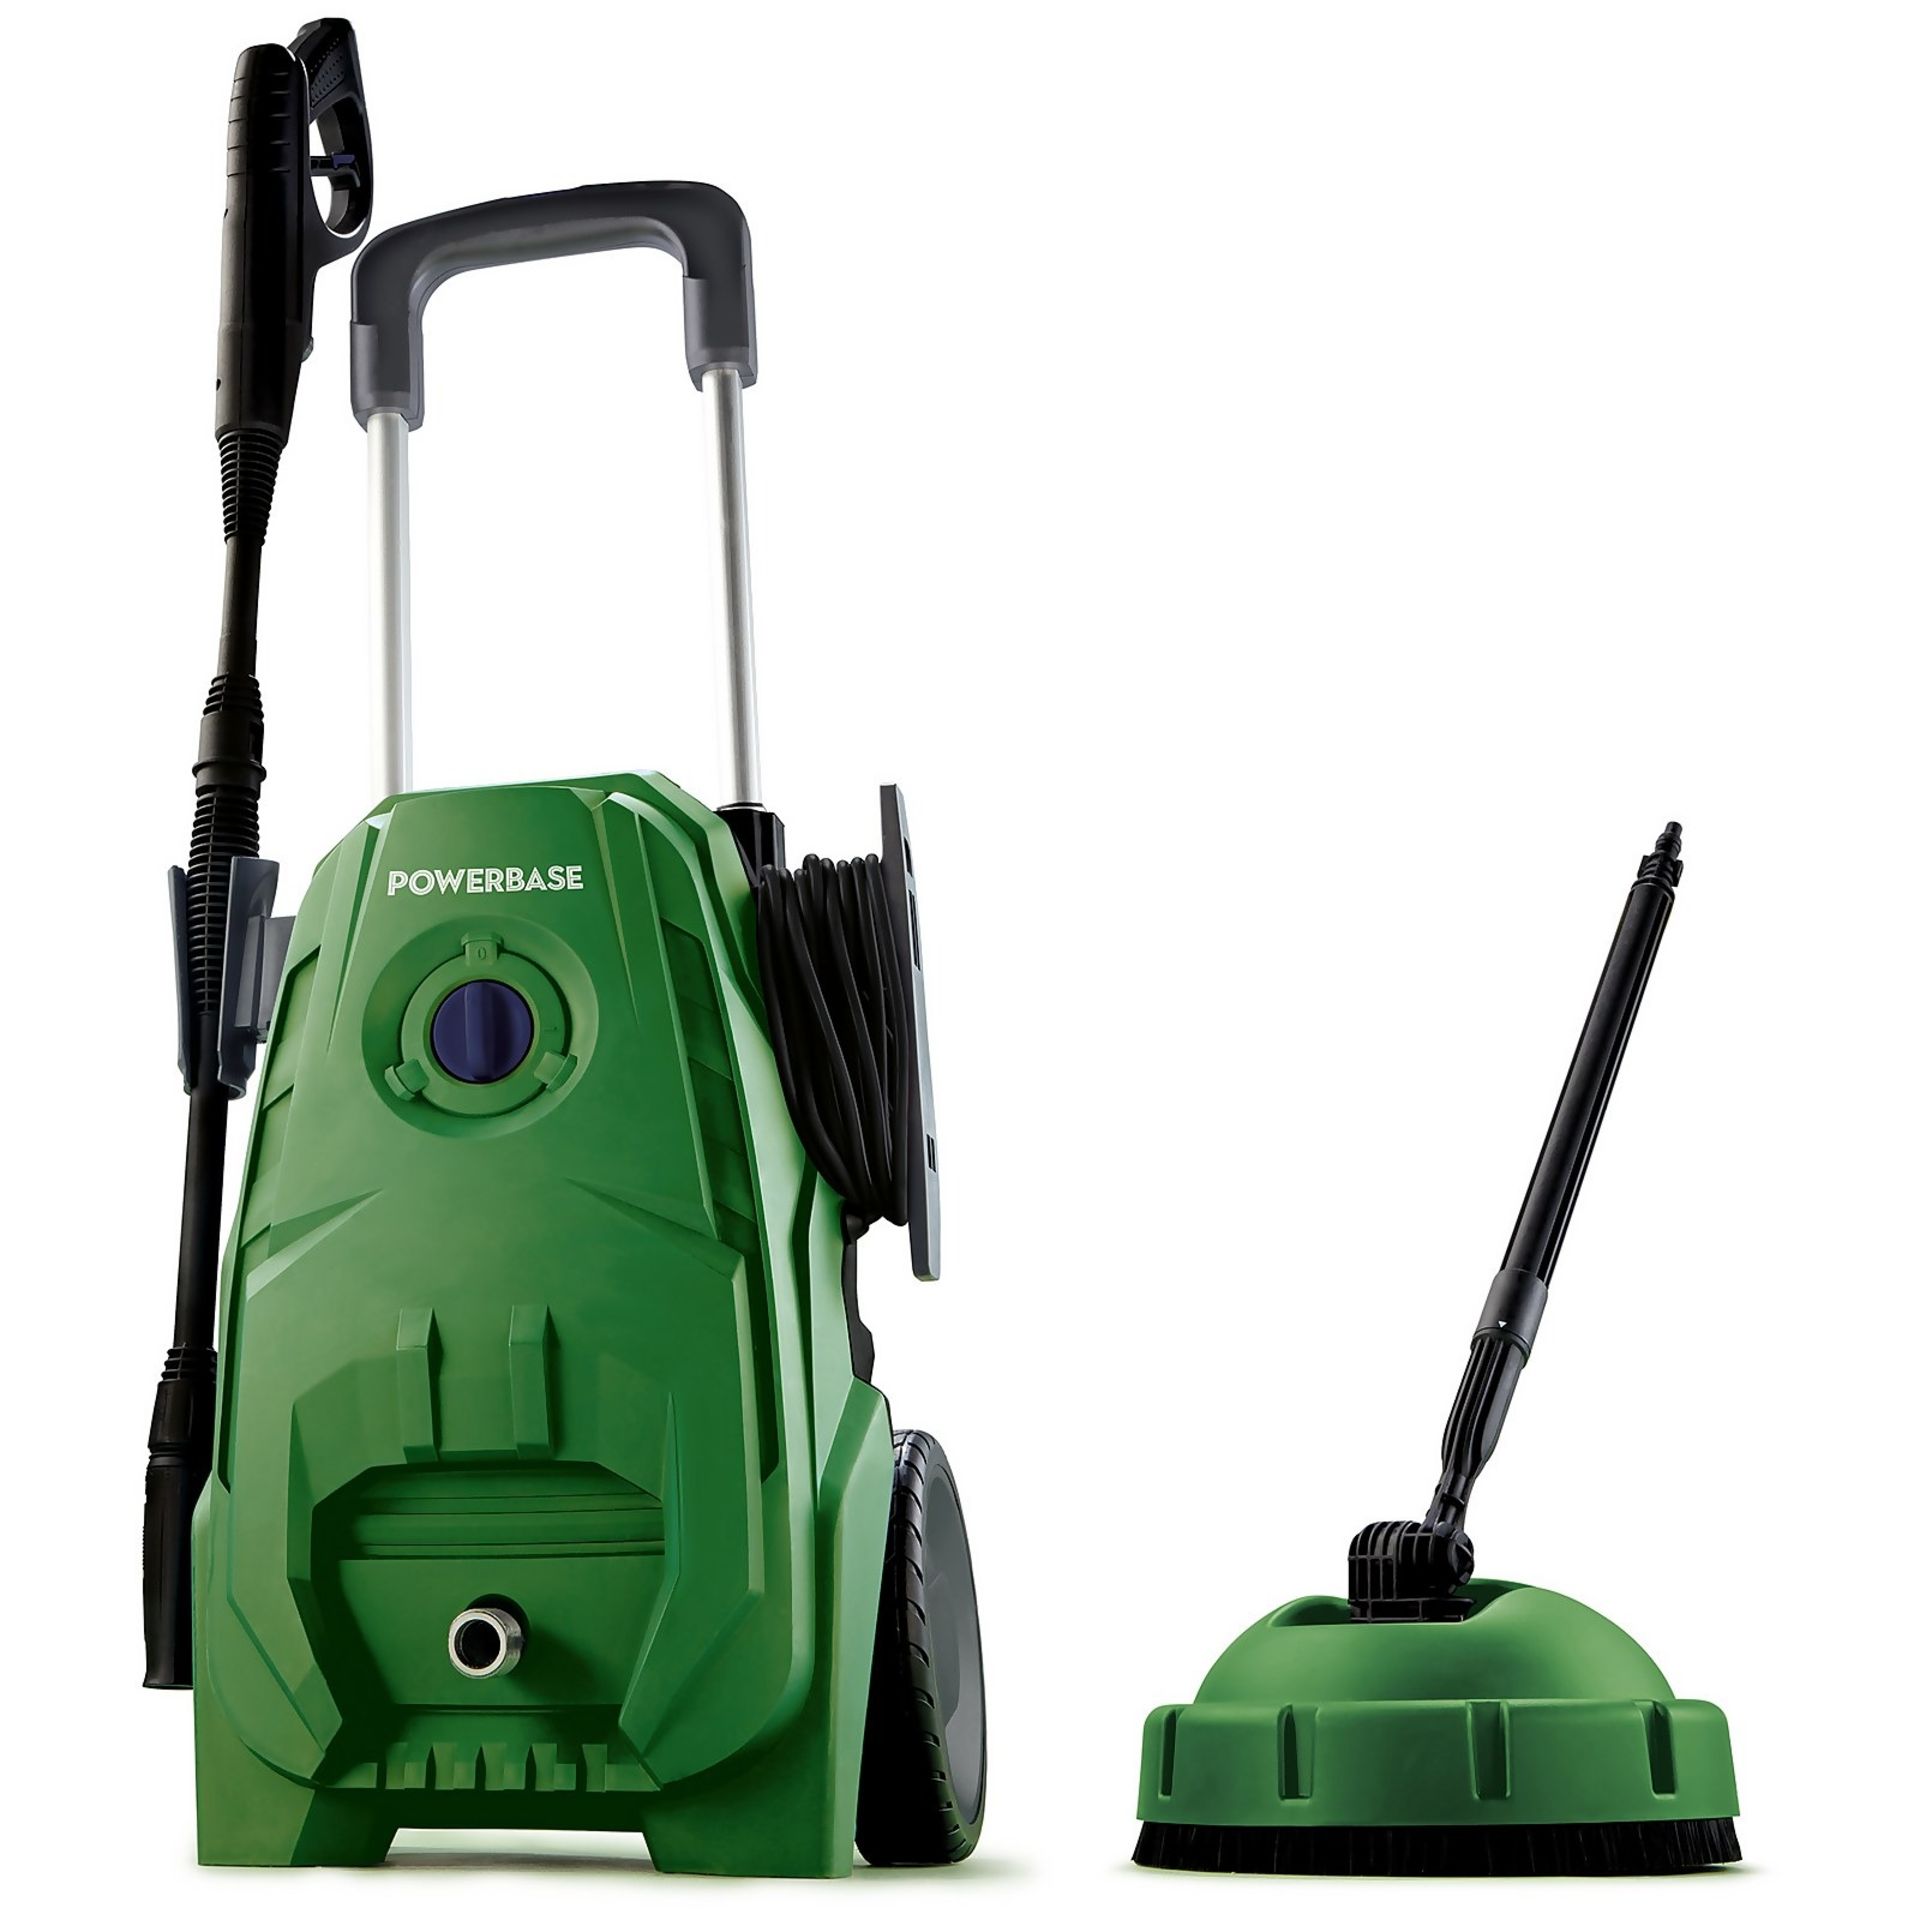 Powerbase 1850W Pressure Washer with Patio Cleaner - ER26